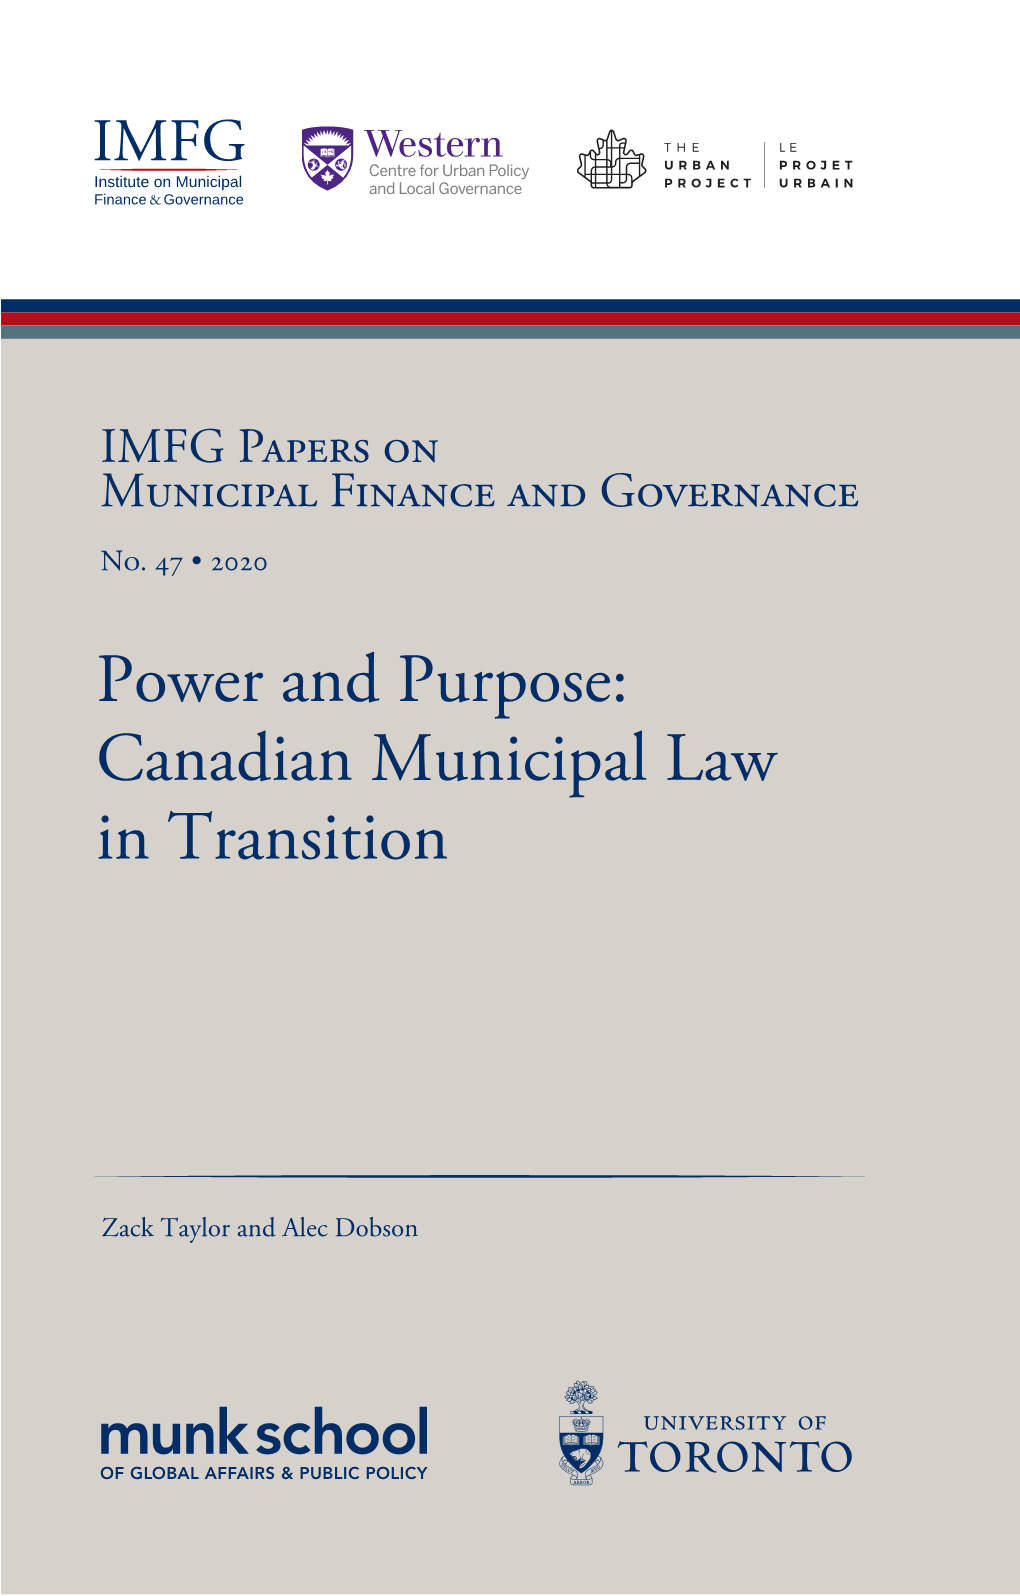 Power and Purpose: Canadian Municipal Law in Transition